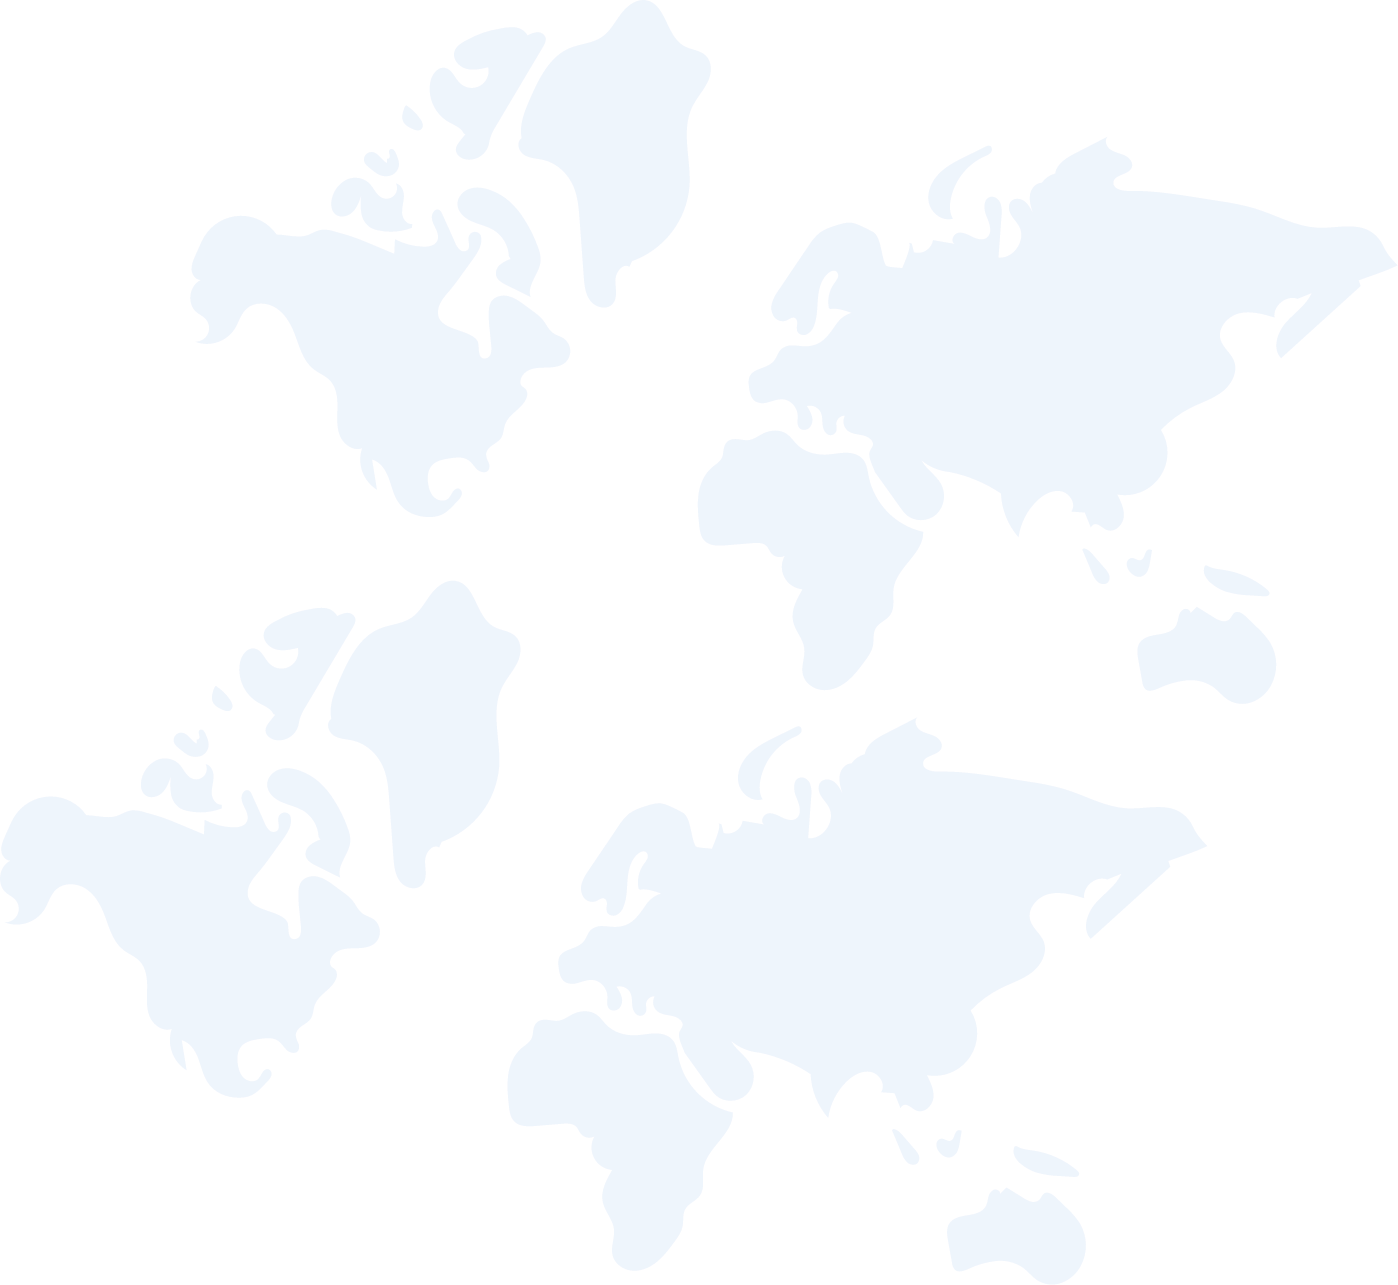 This is a world map